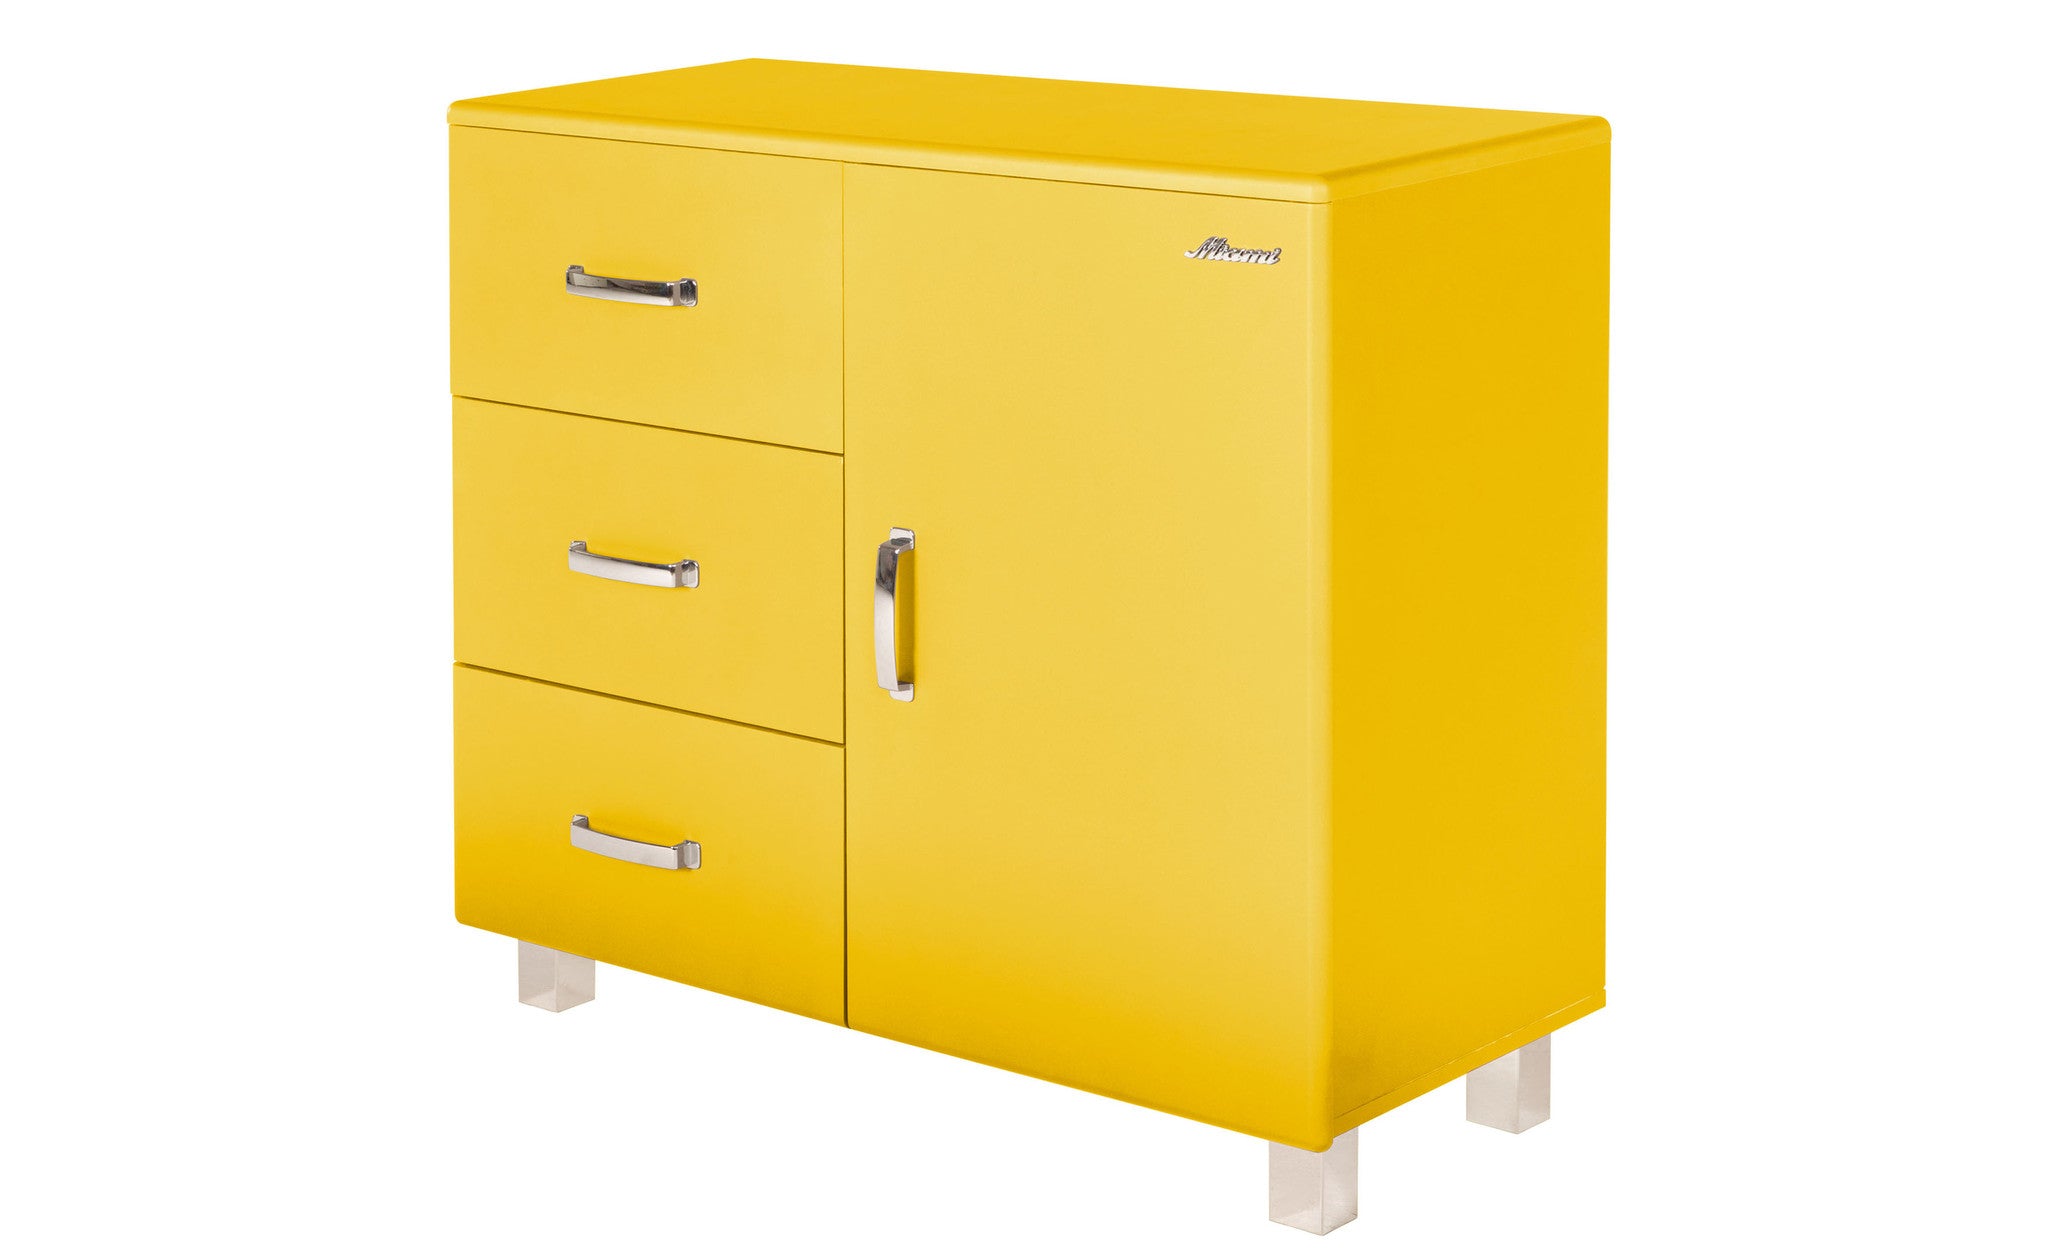 Miami Dresser With 1 Door With Soft Close And 3 Full Extension